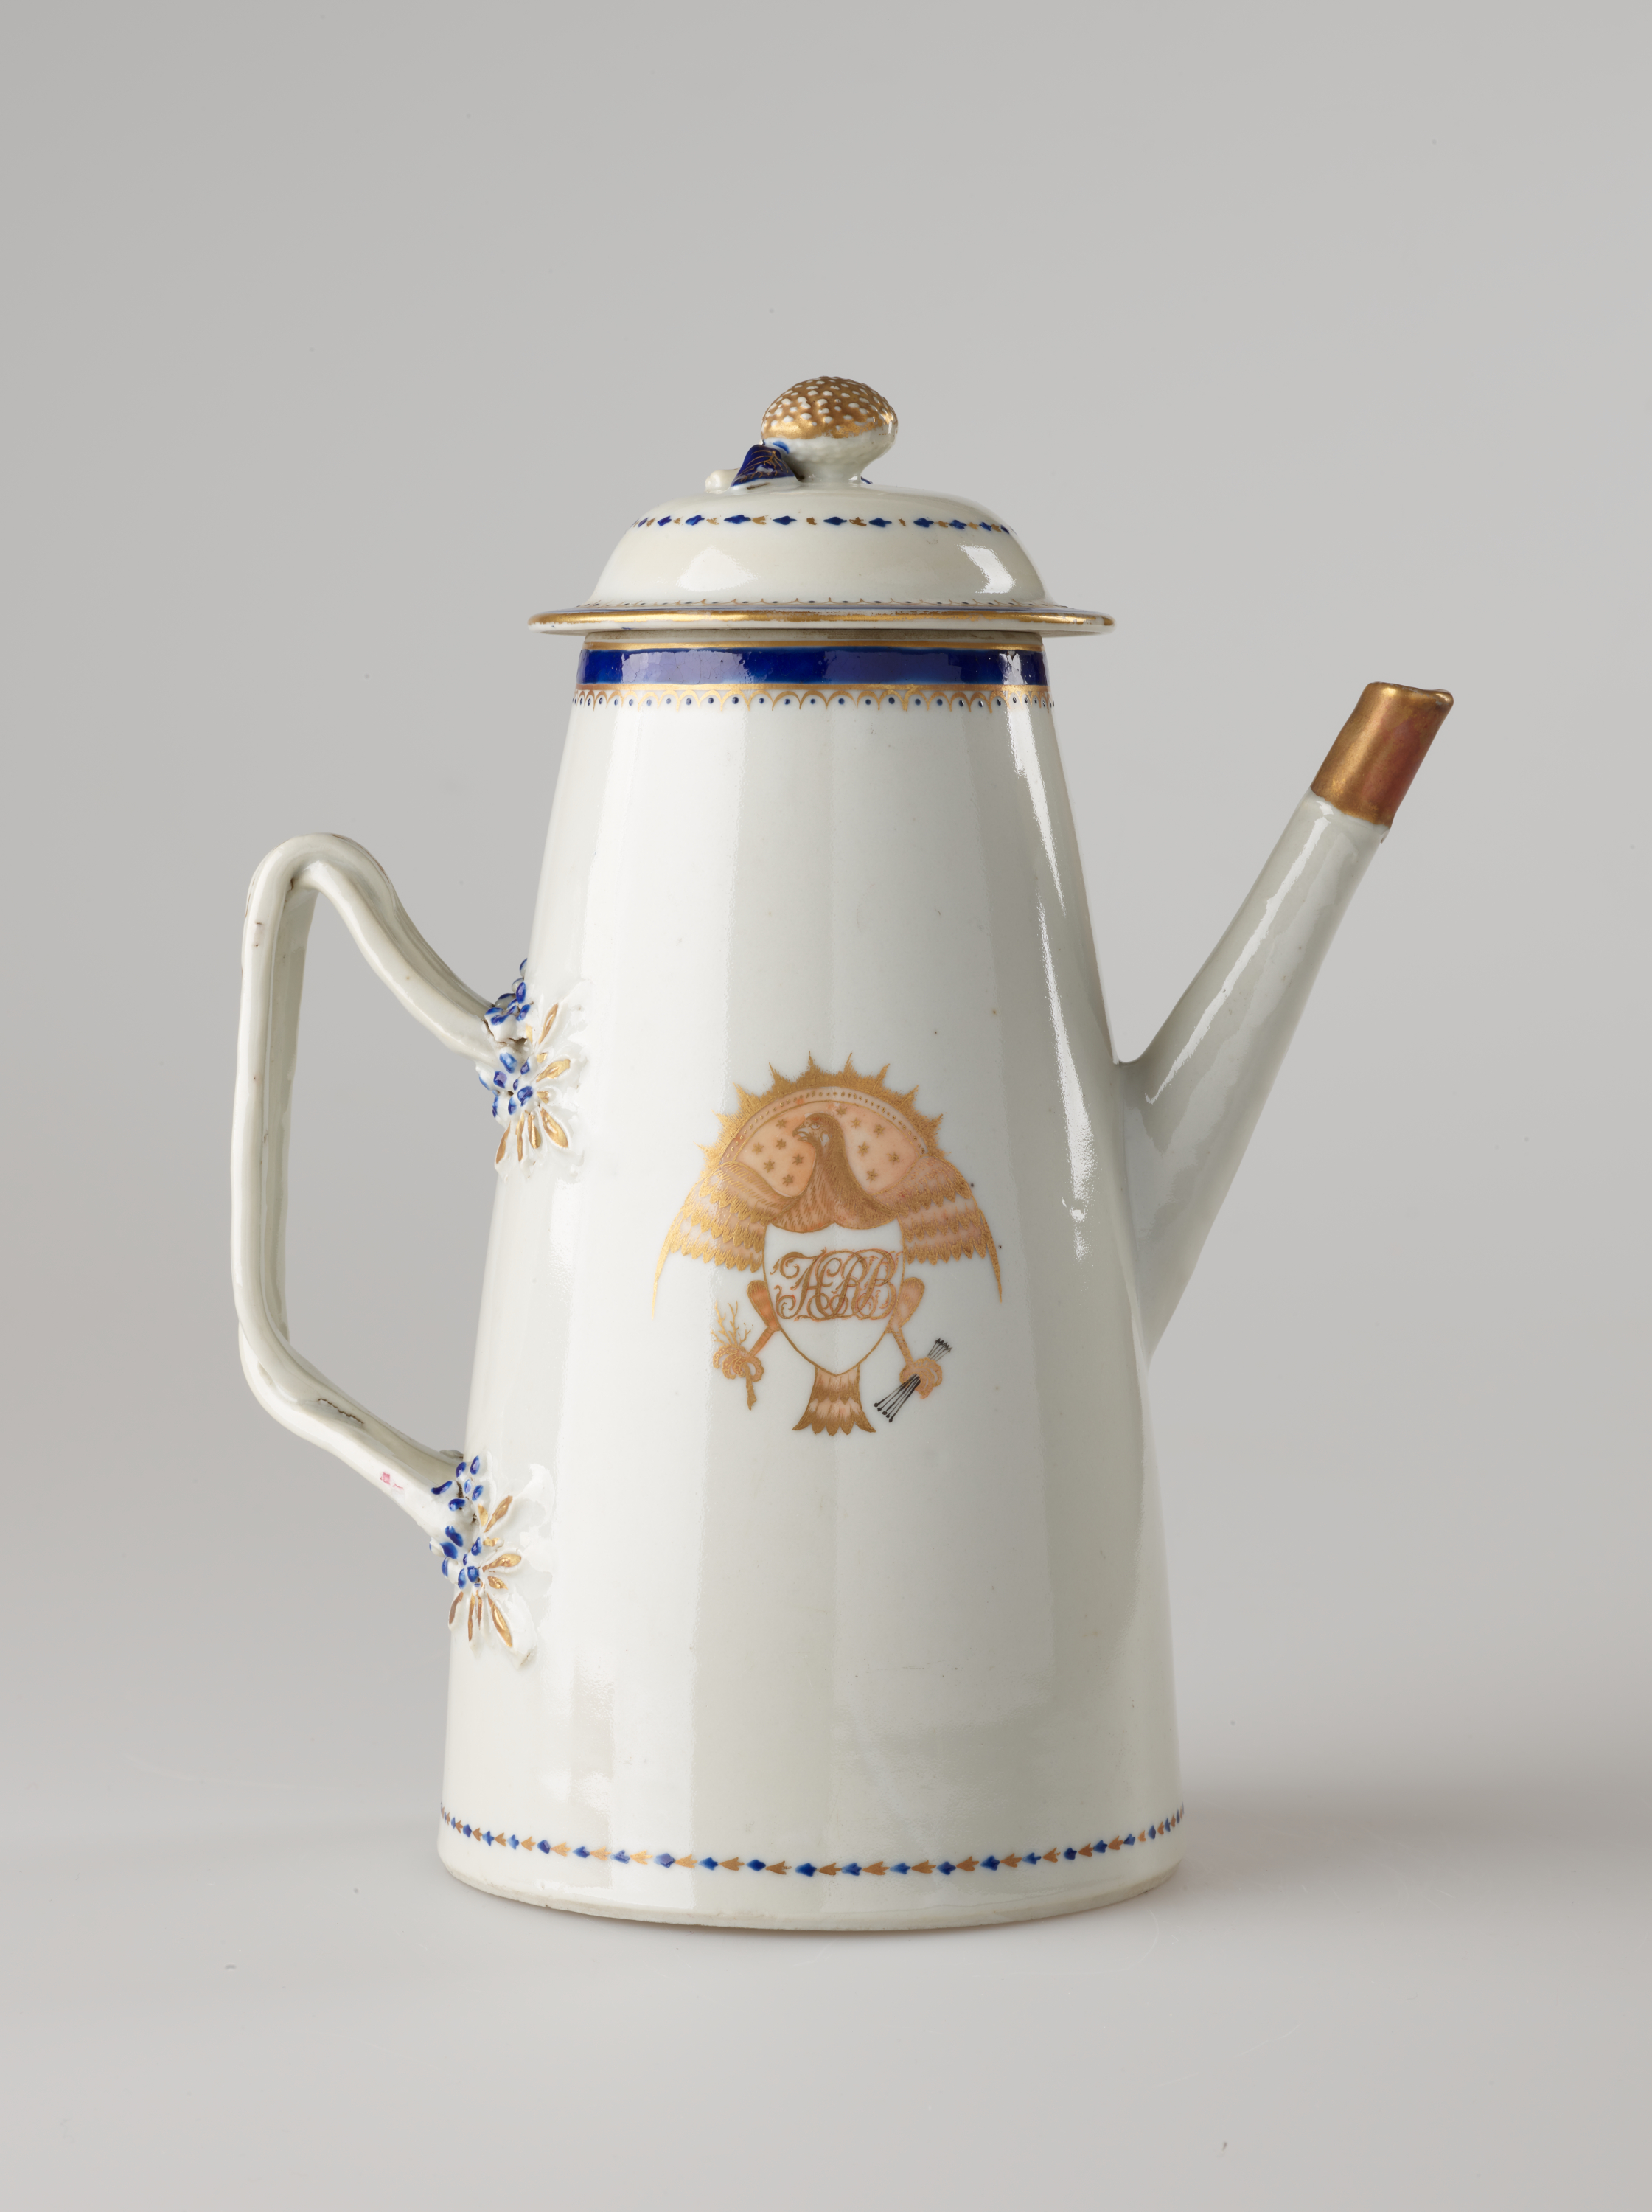 /A%20white%2C%20blue%20and%20gilded%20teapot%20with%20a%20long%20straight%20spout%2C%20a%20handle%2C%20and%20lid.%20The%20central%20decoration%20depicts%20a%20heraldry%20bird%20with%20a%20shield%20and%20objects%20in%20its%20talons.